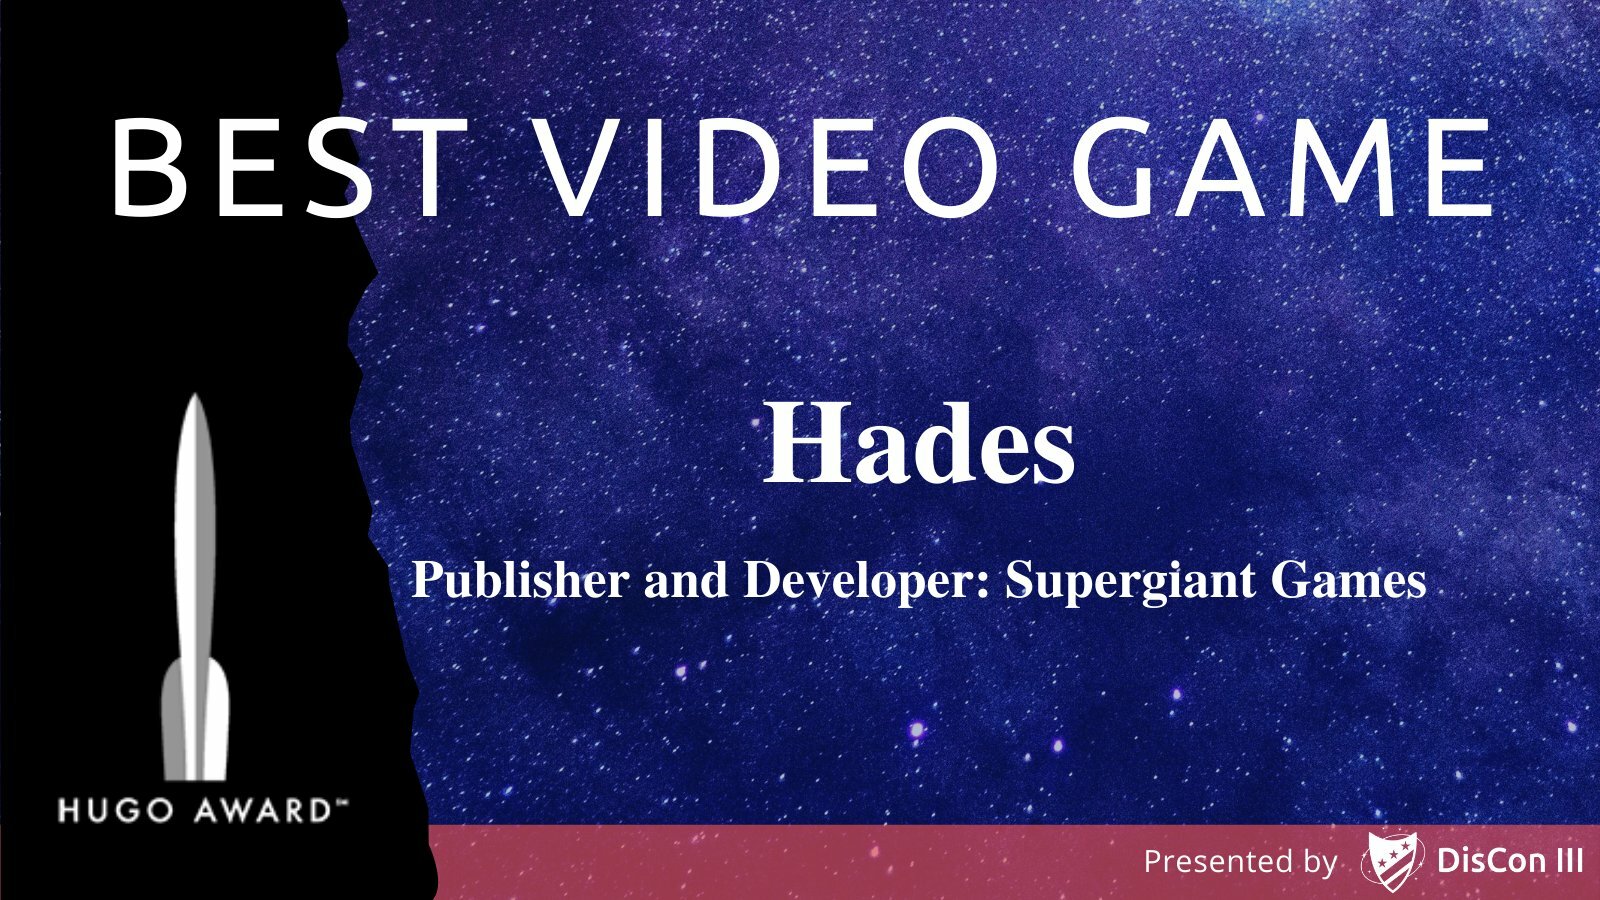 Hermes is here with some good news: Our - Supergiant Games